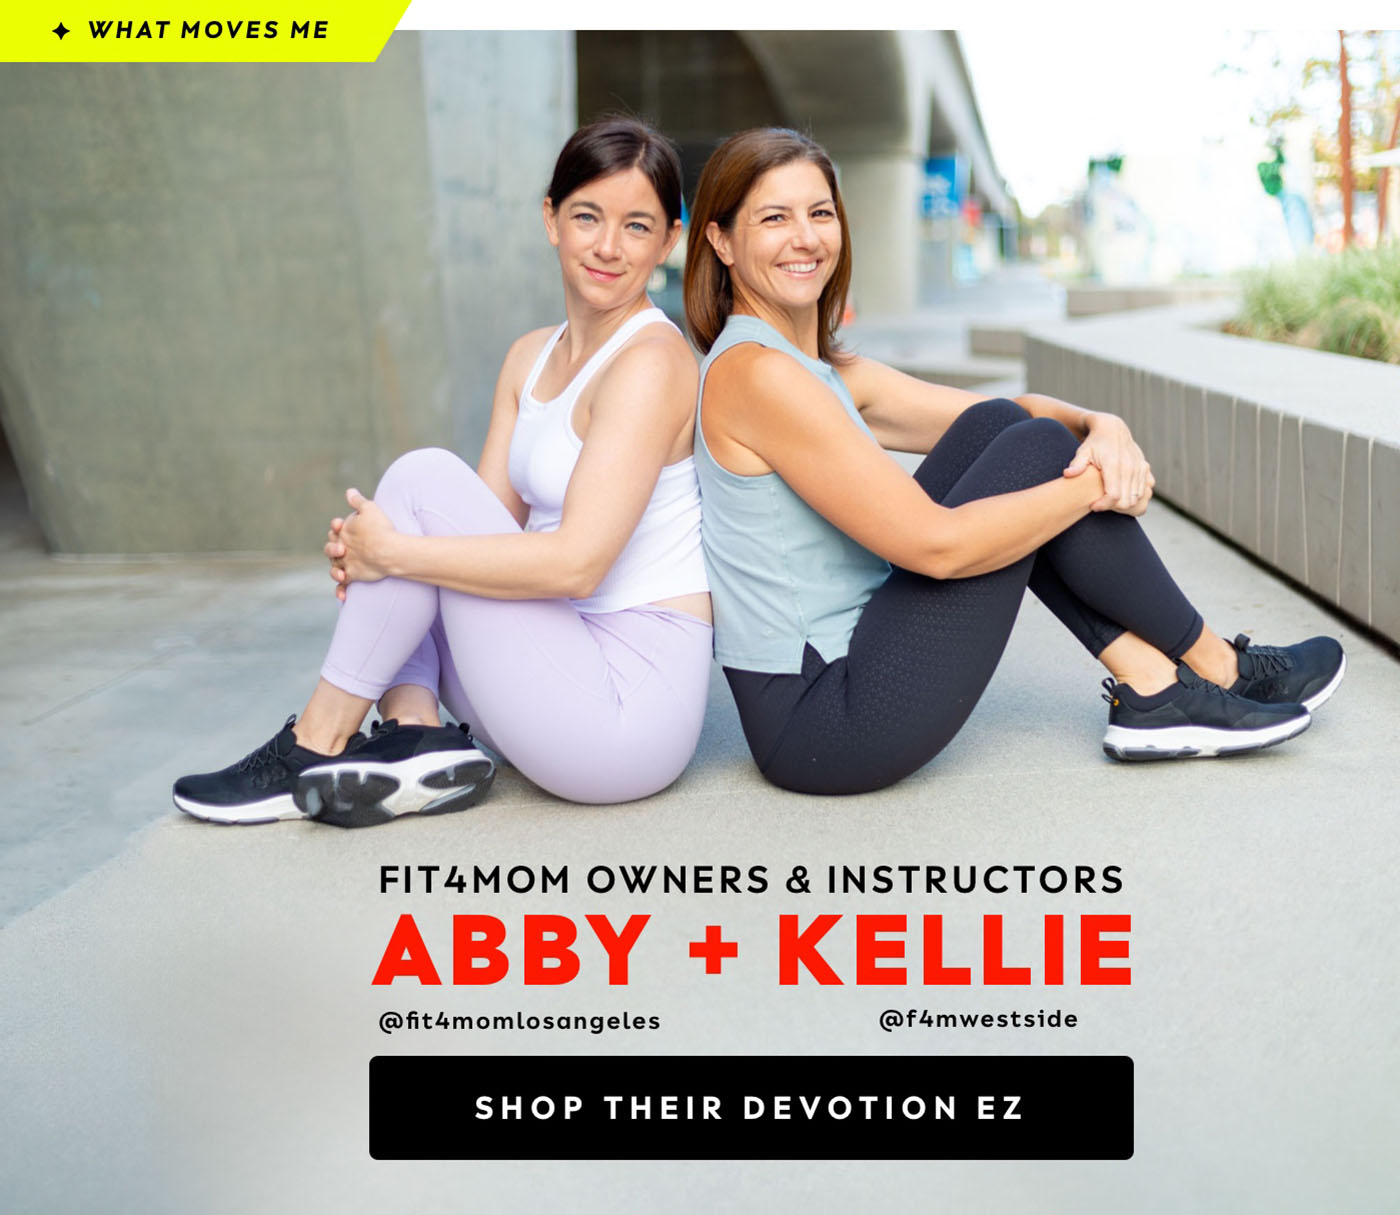 Fit4Mom owners and instructors. Abby (@fit4momlosangeles) and Kellie (@f4mwestside). Shop their Devotion EZ.